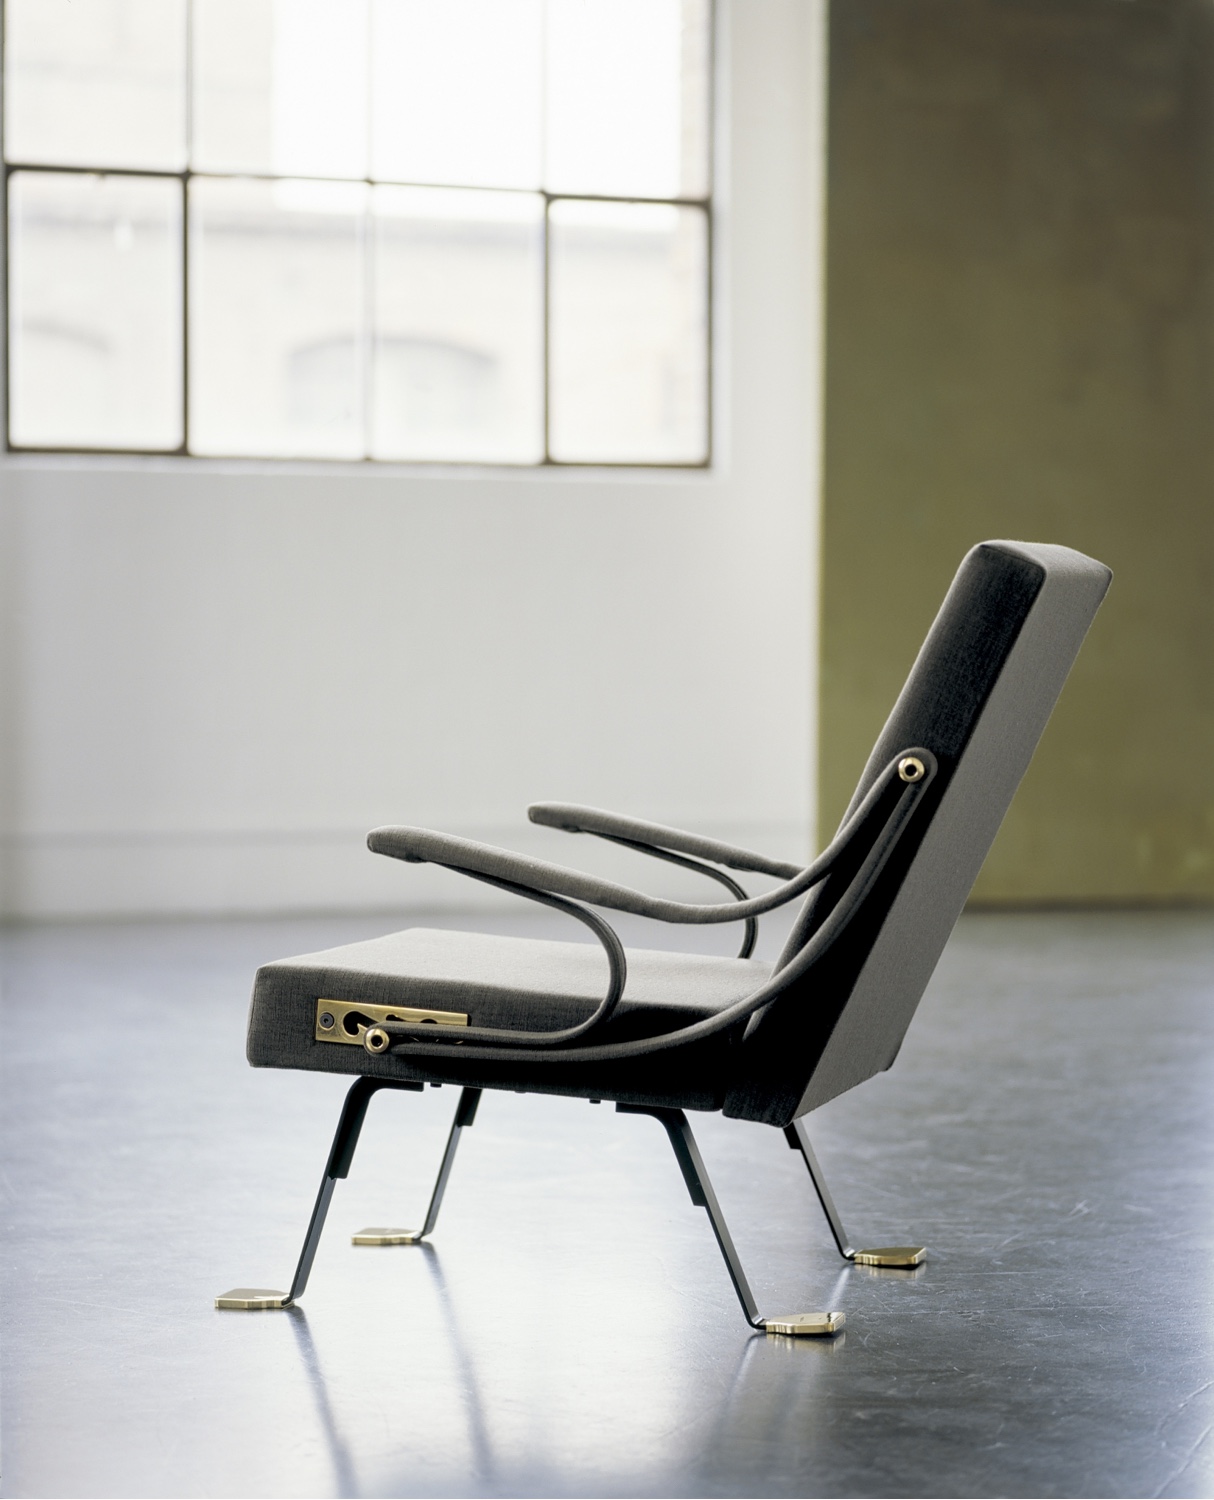 Digamma-metal-chaise-longue